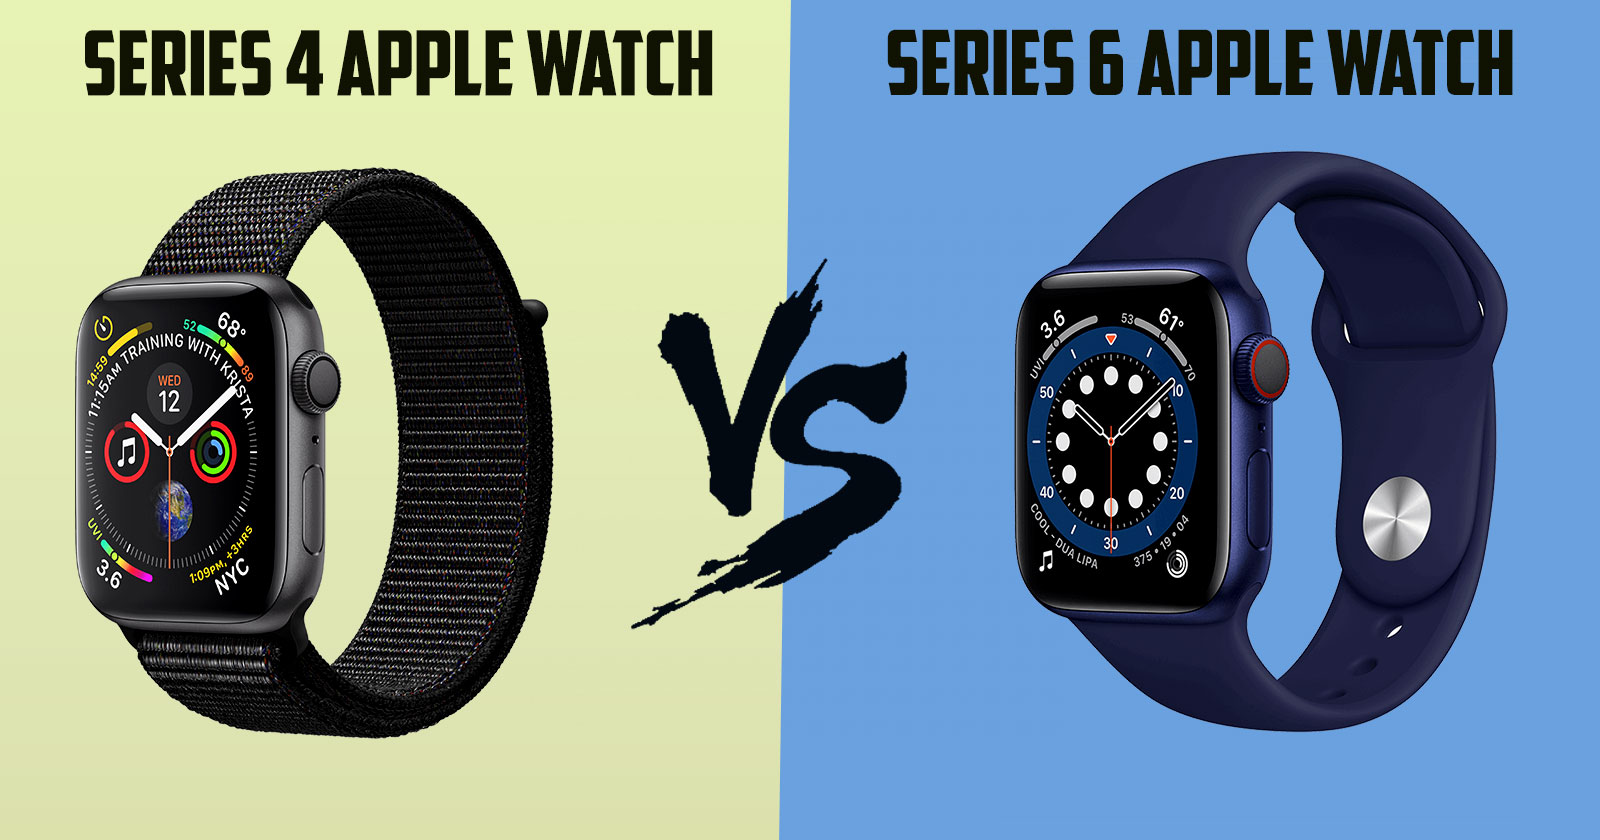 What's the Difference Between Series 4 and 6 Apple Watch